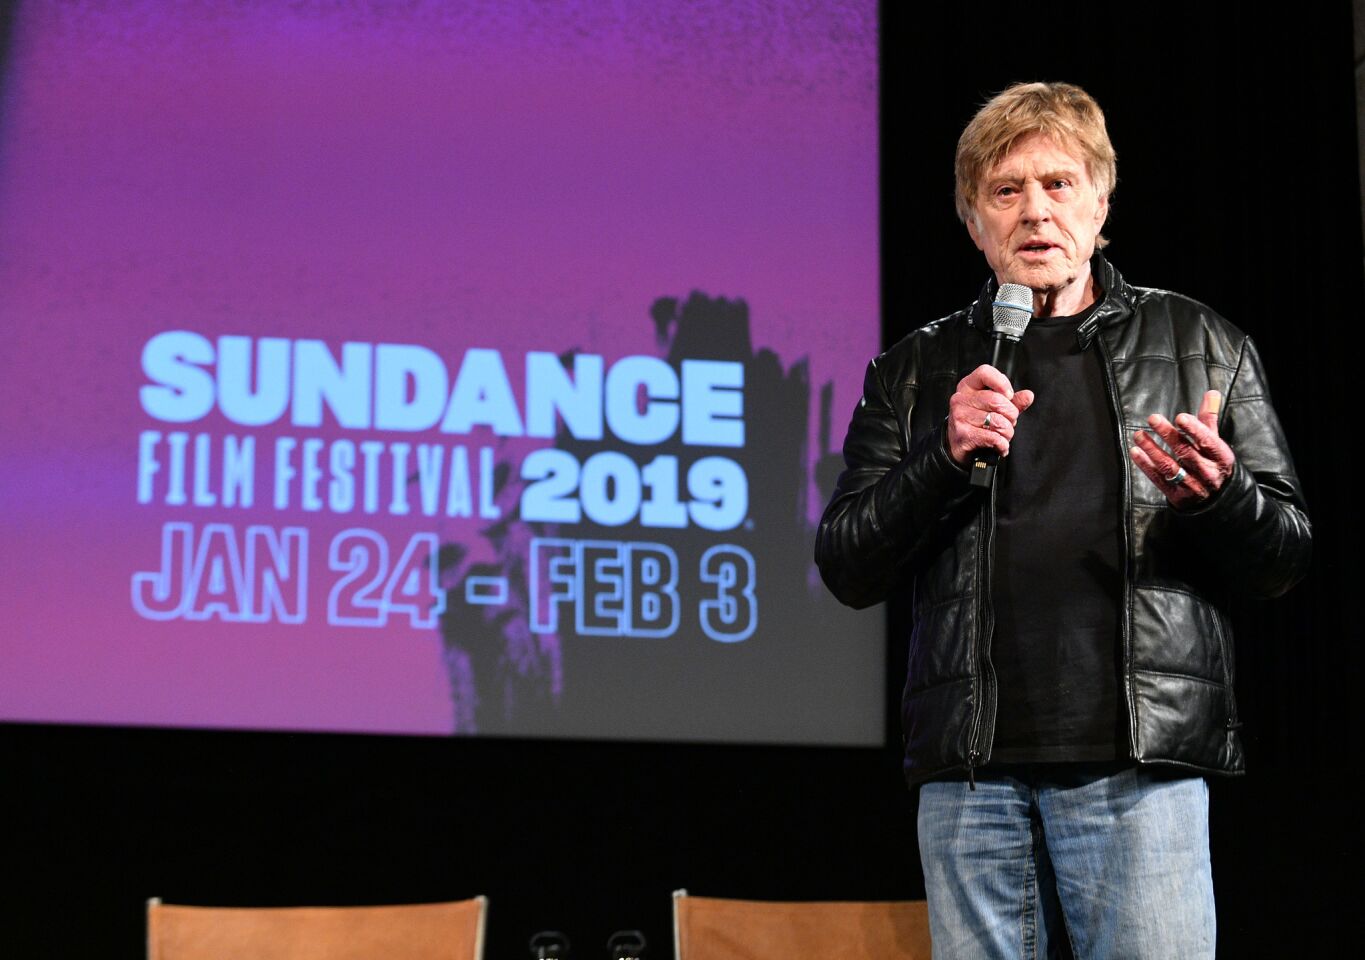 Robert Redford. president and founder of the Sundance Institute, welcomes visitors to the 2019 Sundance Film Festival on Jan. 23 at the Egyptian Theatre in Park City, Utah.